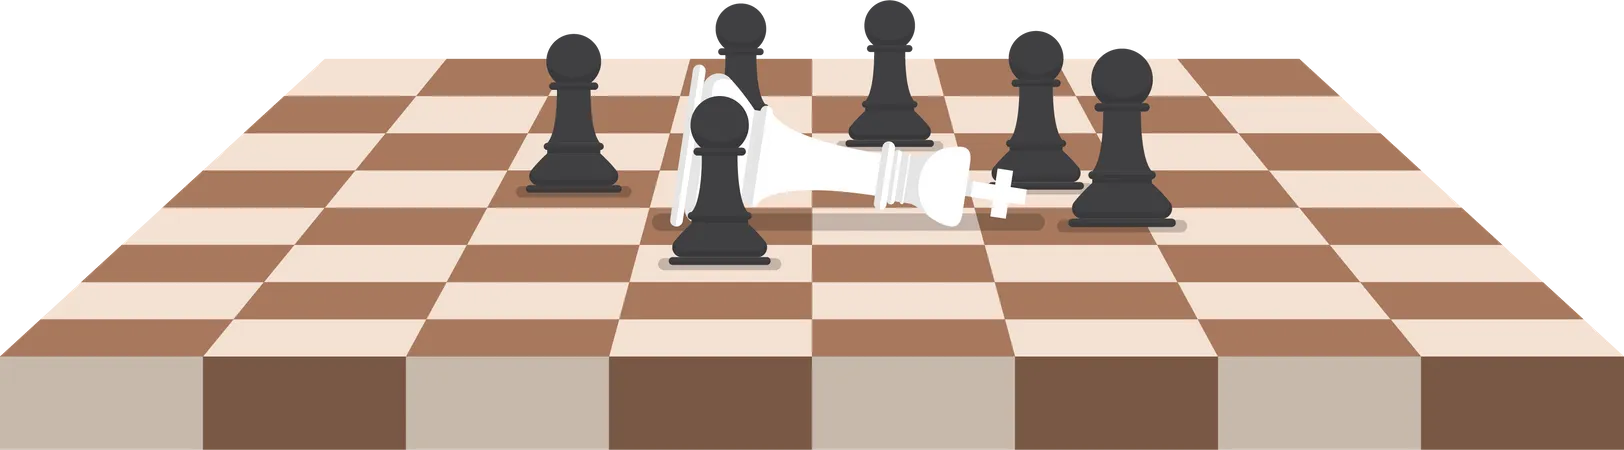 Group of black chess pawns defeat the white king  Illustration